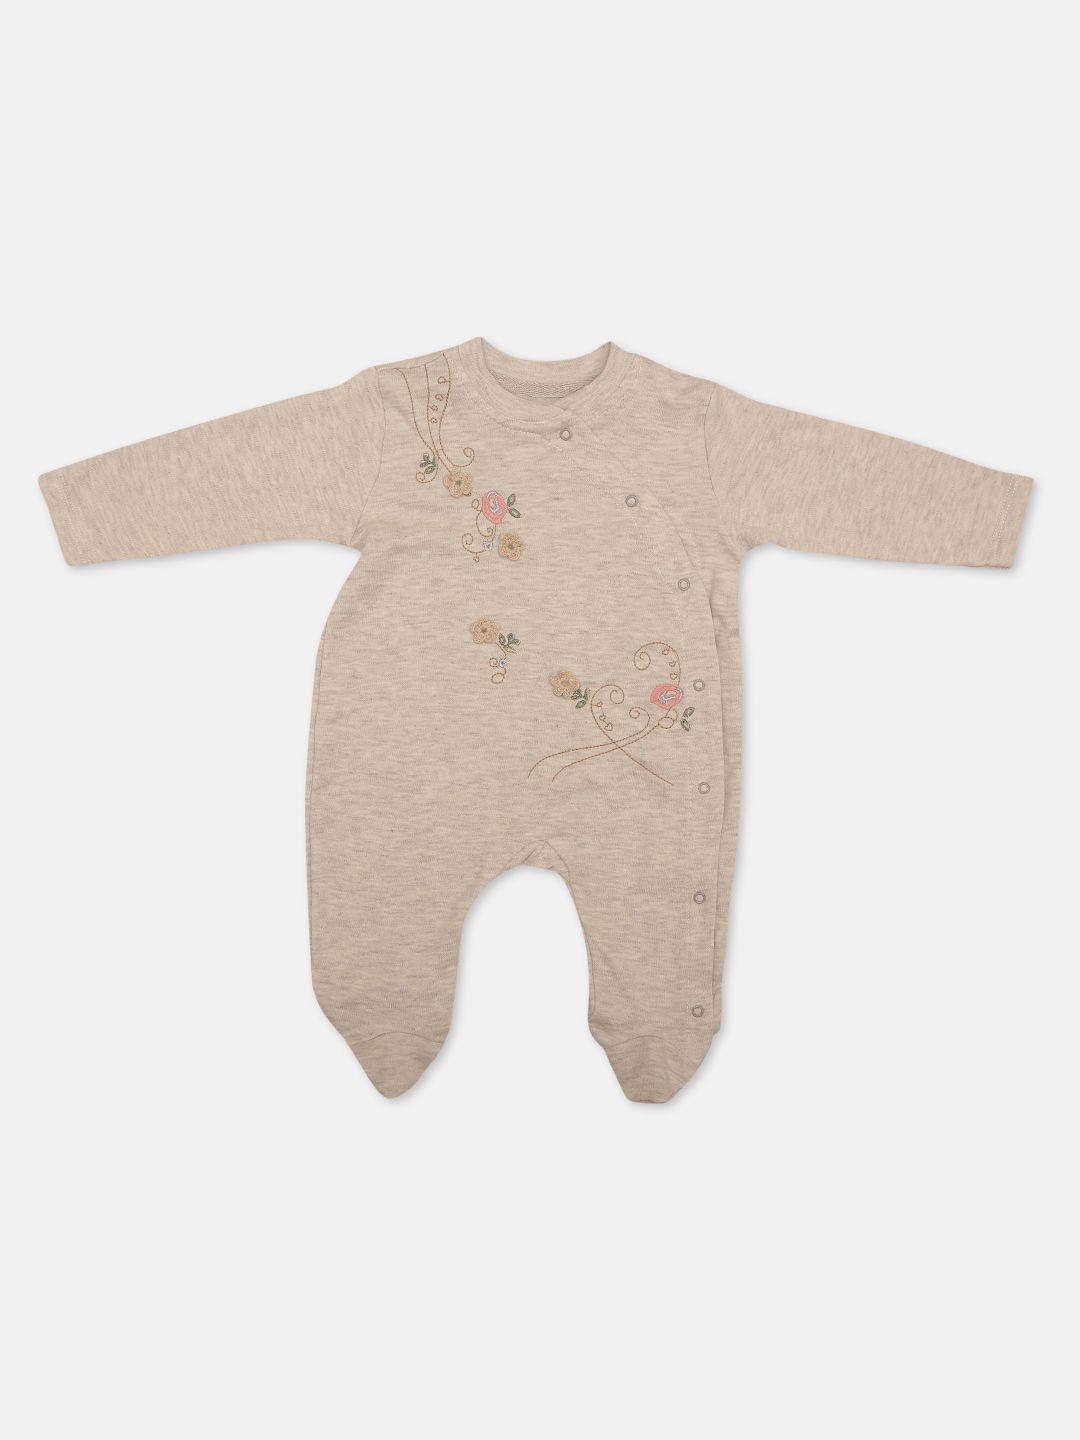 zyra-kids-infant-girls-grey-embroidered-rompers